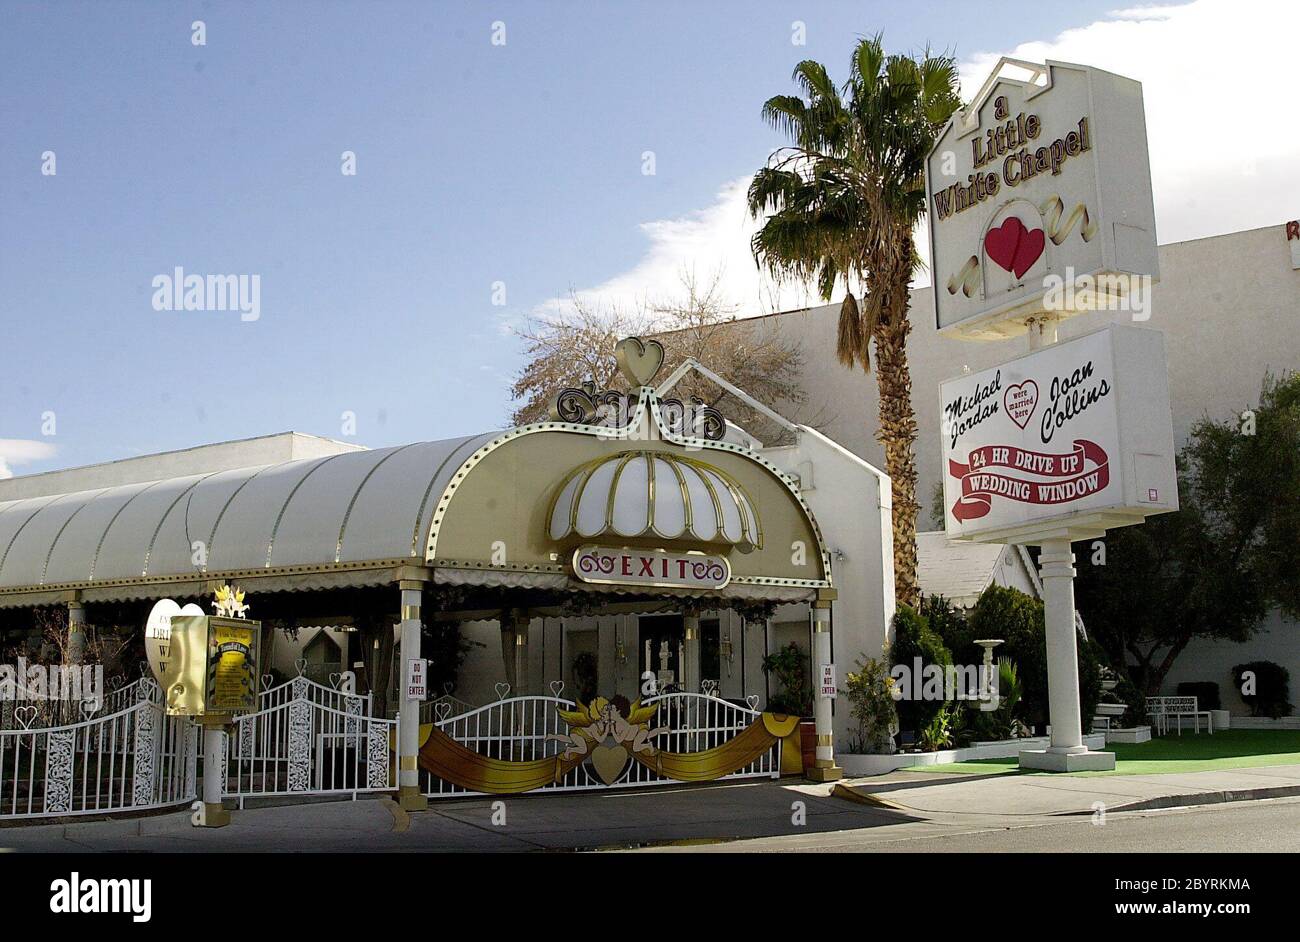 Wedding Chapel Las Vegsa 625 Hotel and most important places in Las Vegas The most beautiful place in Las Vegas Stock Photo